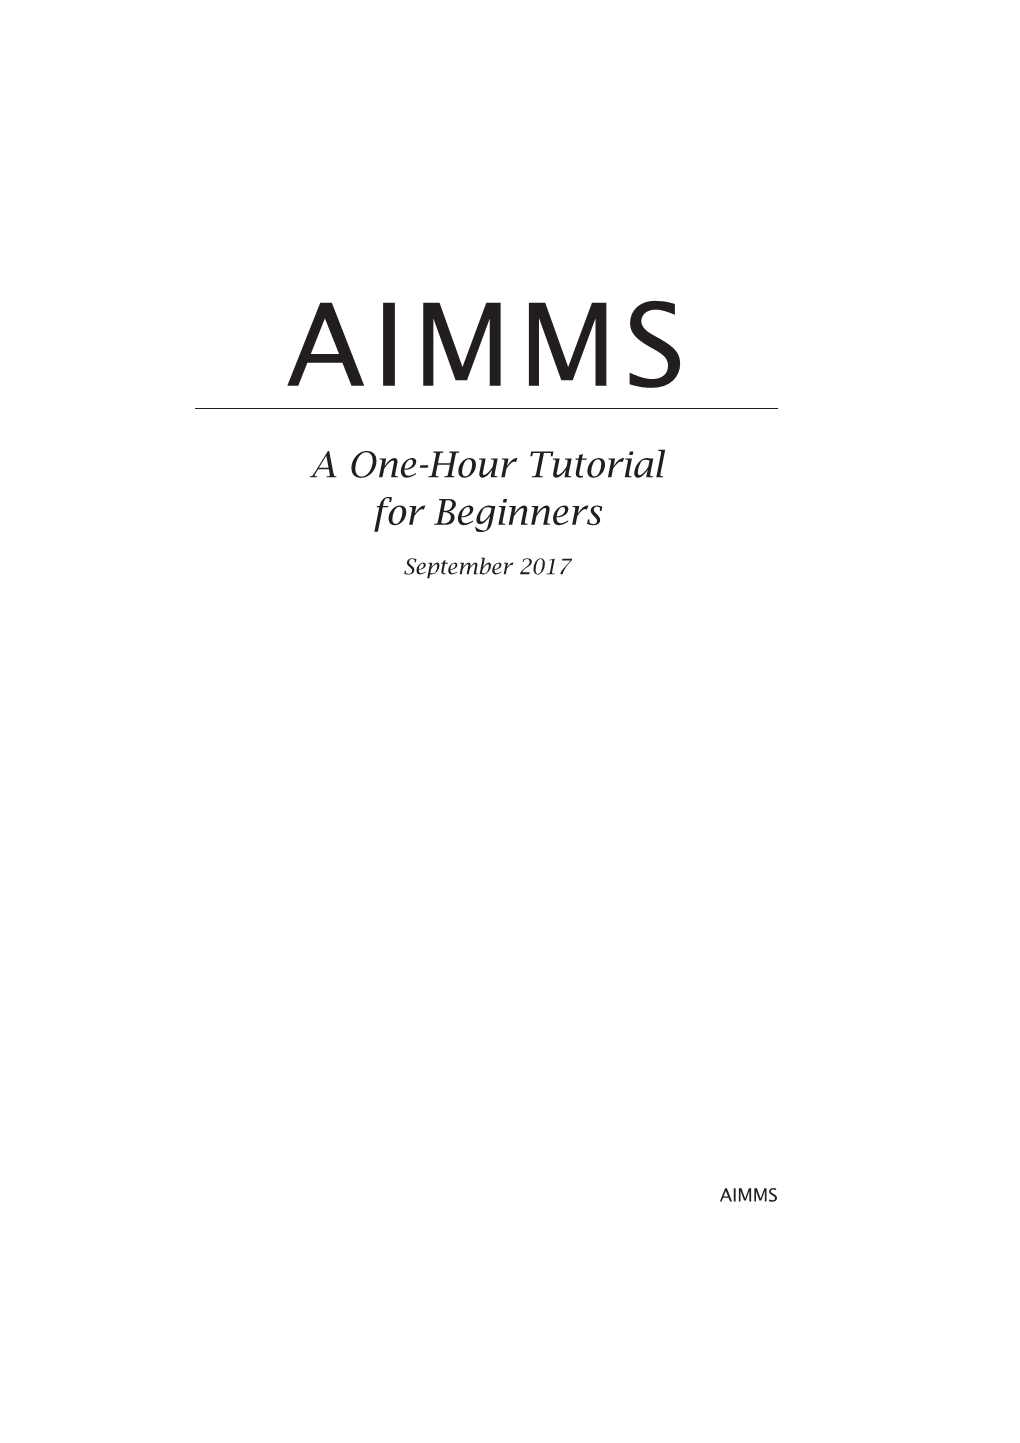 AIMMS Tutorial for Beginners